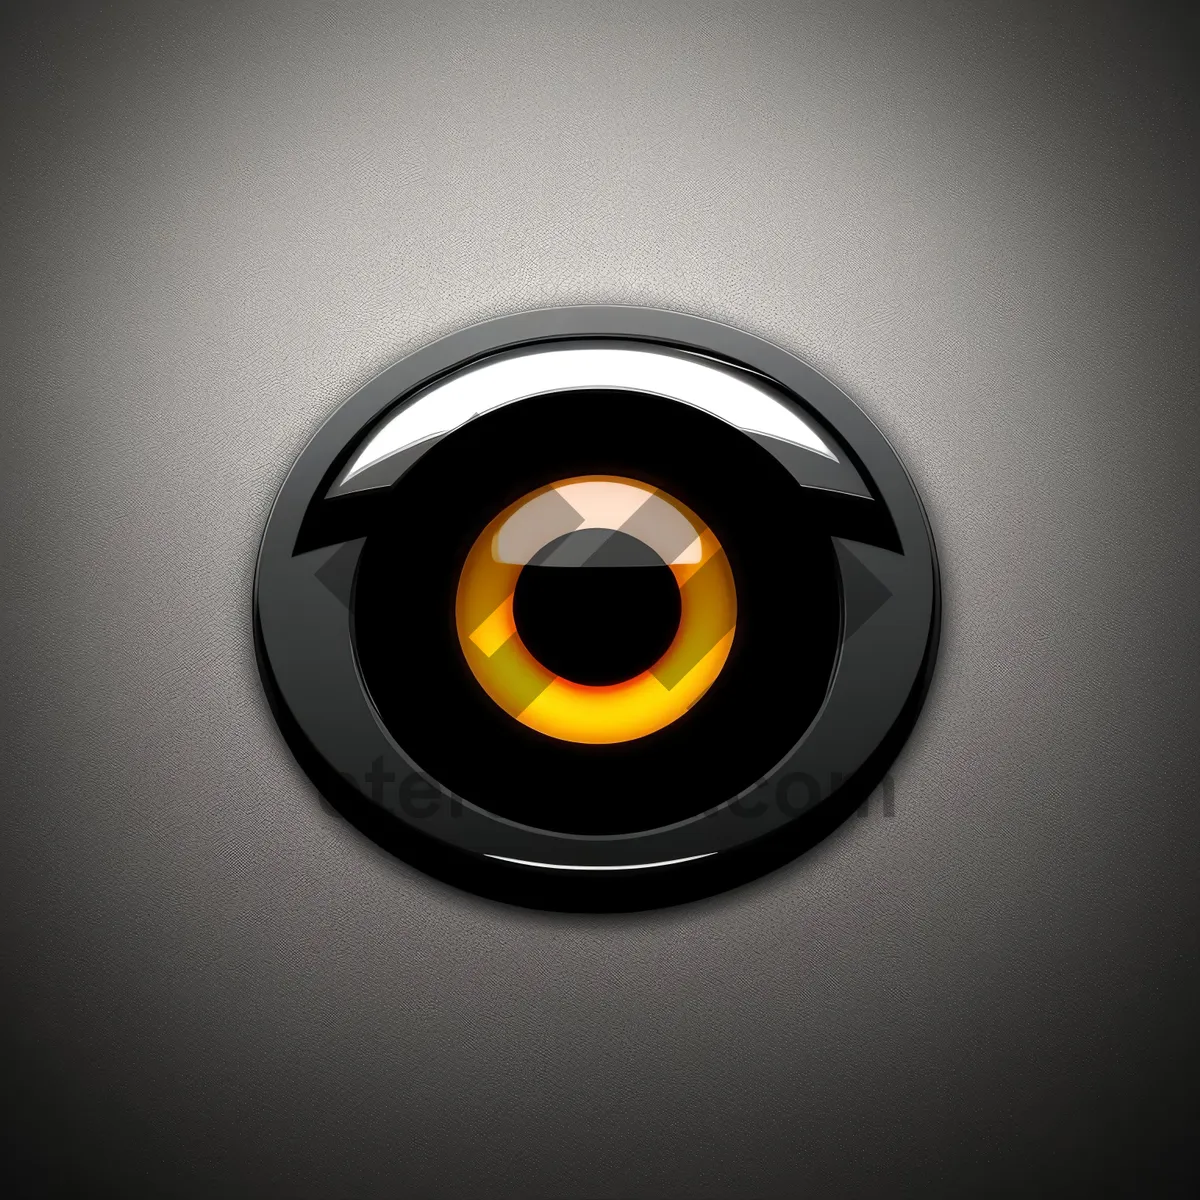 Picture of Modern Shiny Circle Button Design